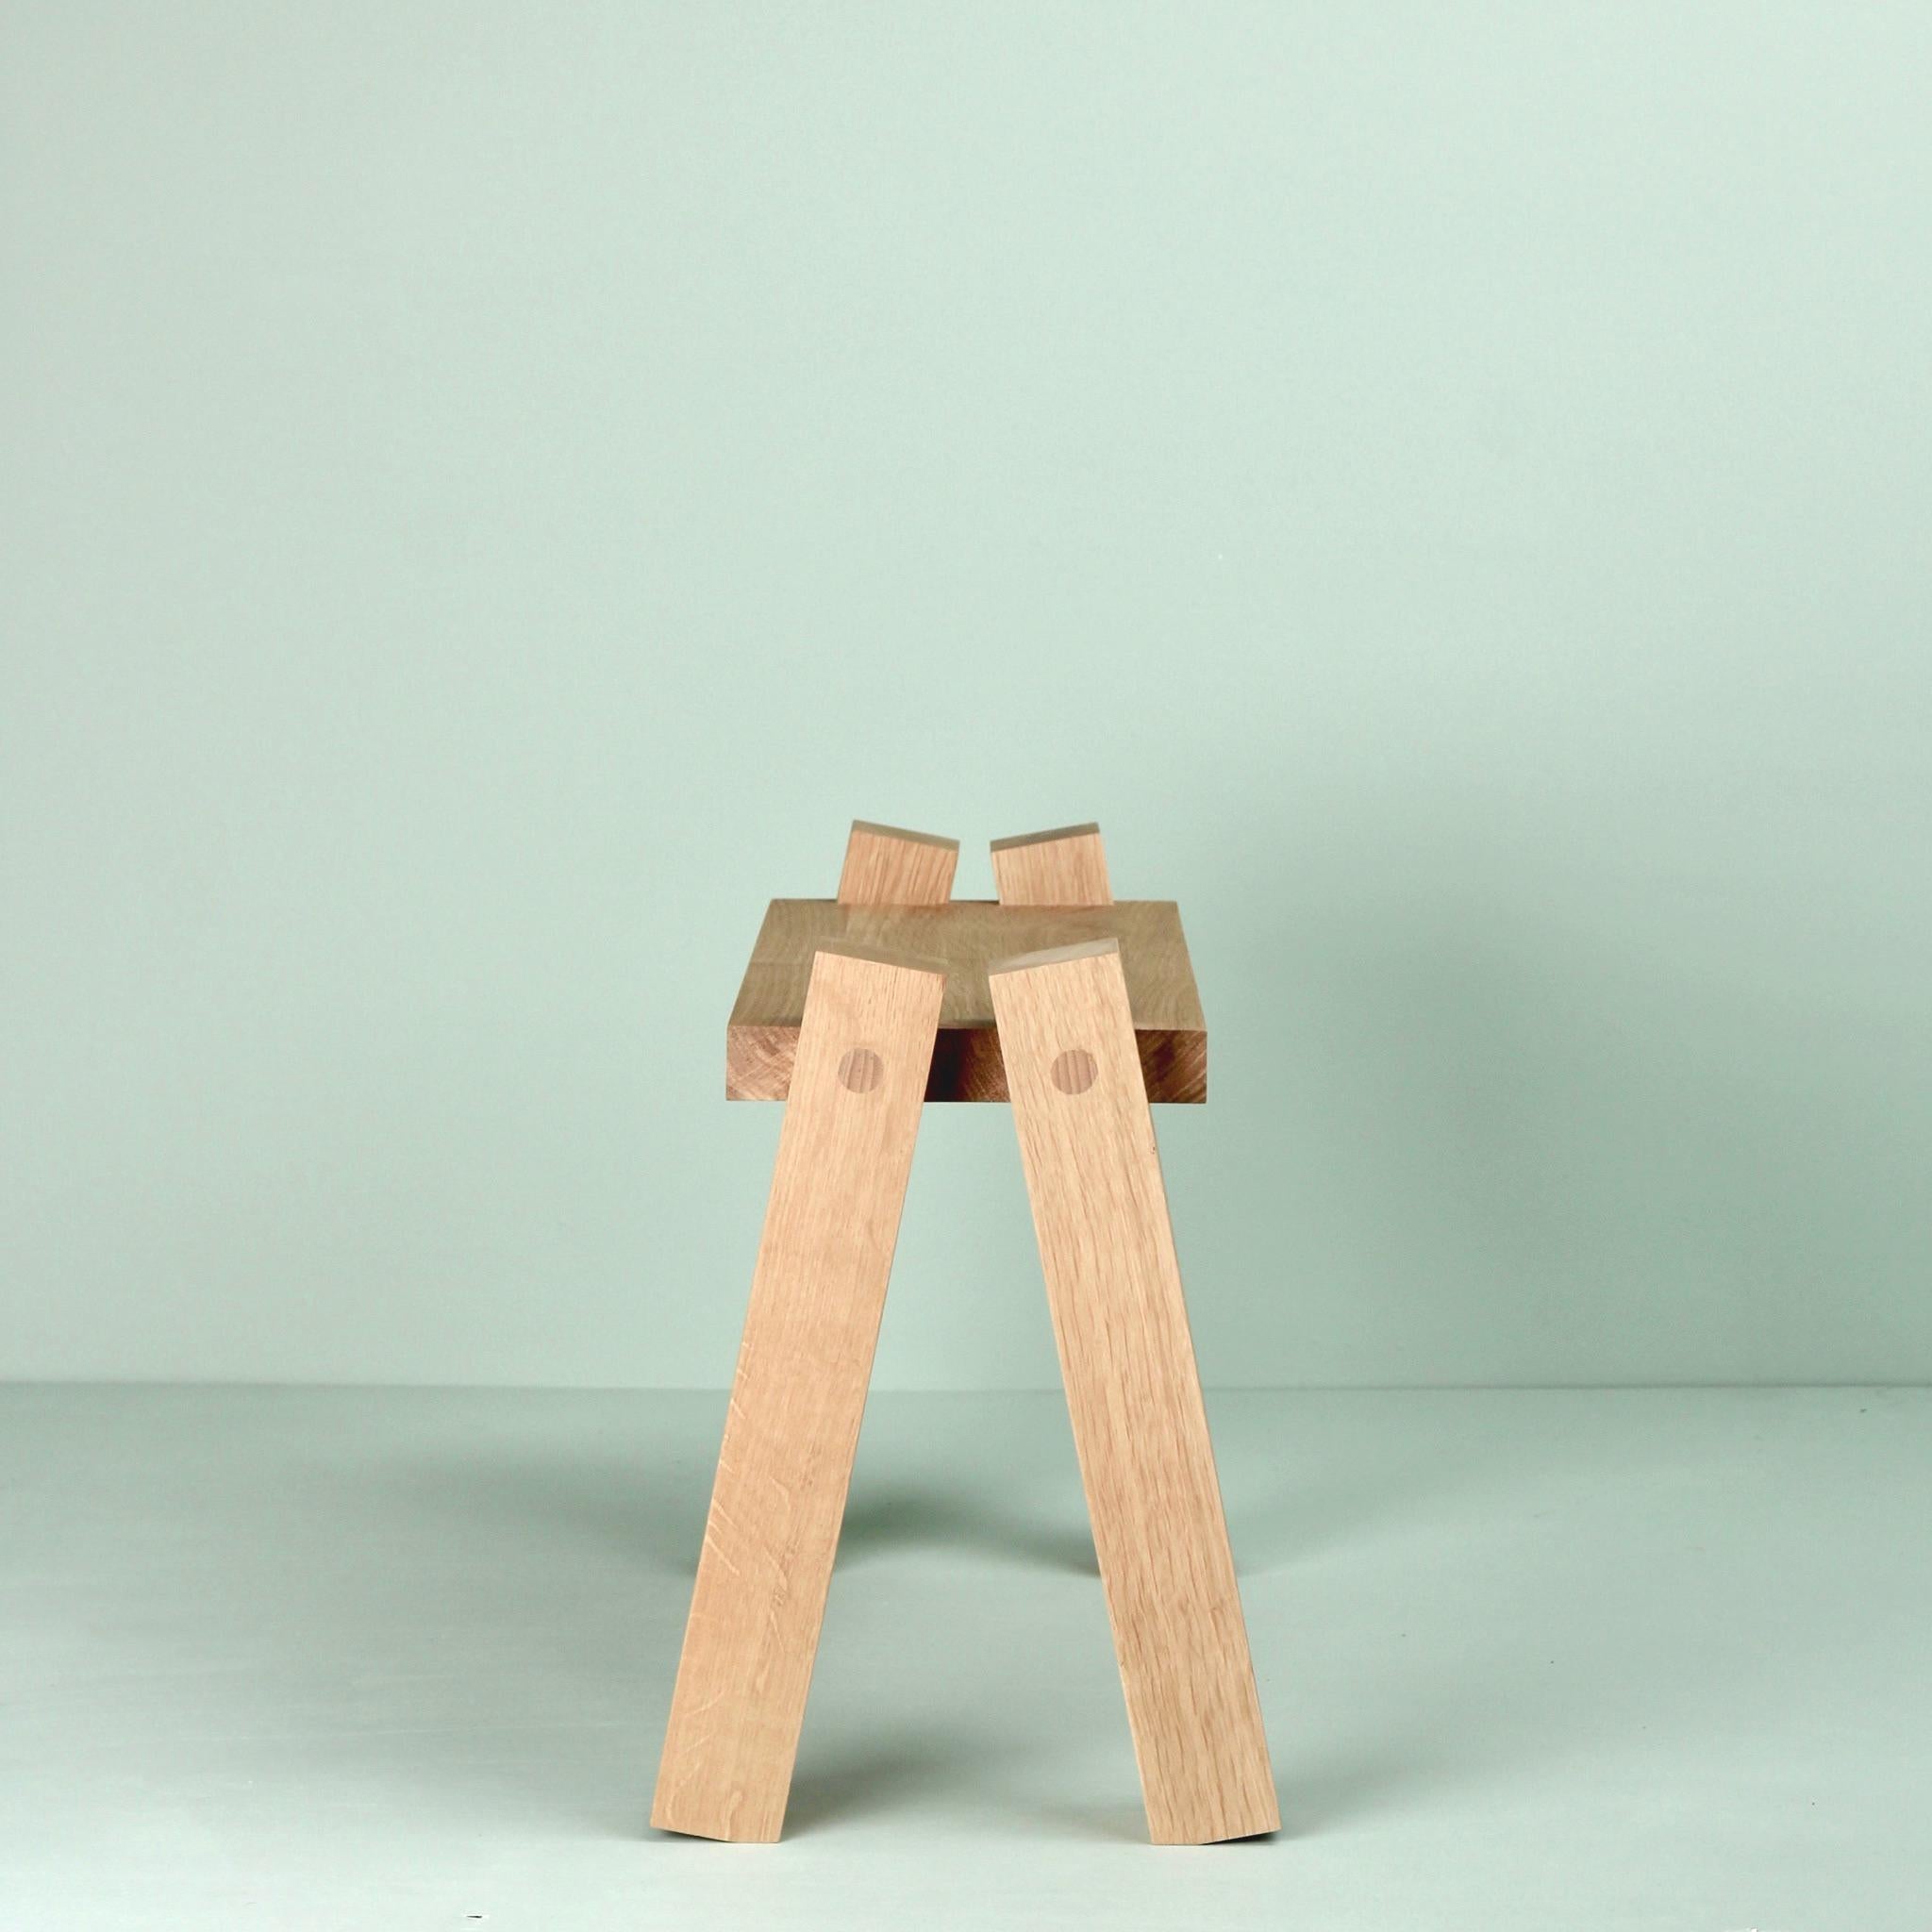 Quatre Pattes by Alto Duo is a multipurpose side table designed by Mayeul Morand-Monteil in 2021.

It is traditionally made in the South of France with French Oak. Small quantities of this item are currently available.

It is available in 3